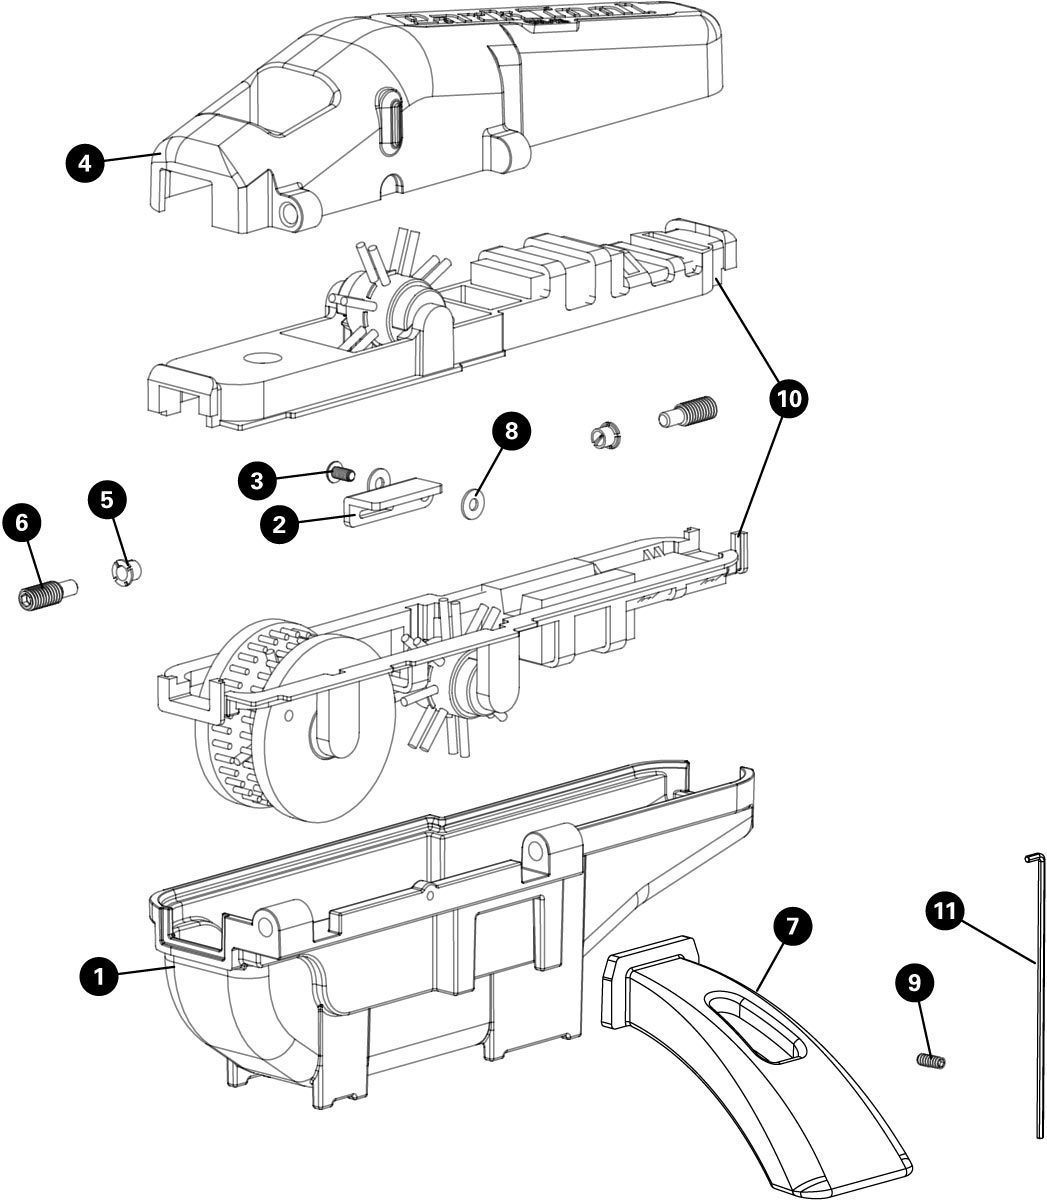 Parts diagram for CM-25 Professional Chain Scrubber, click to enlarge